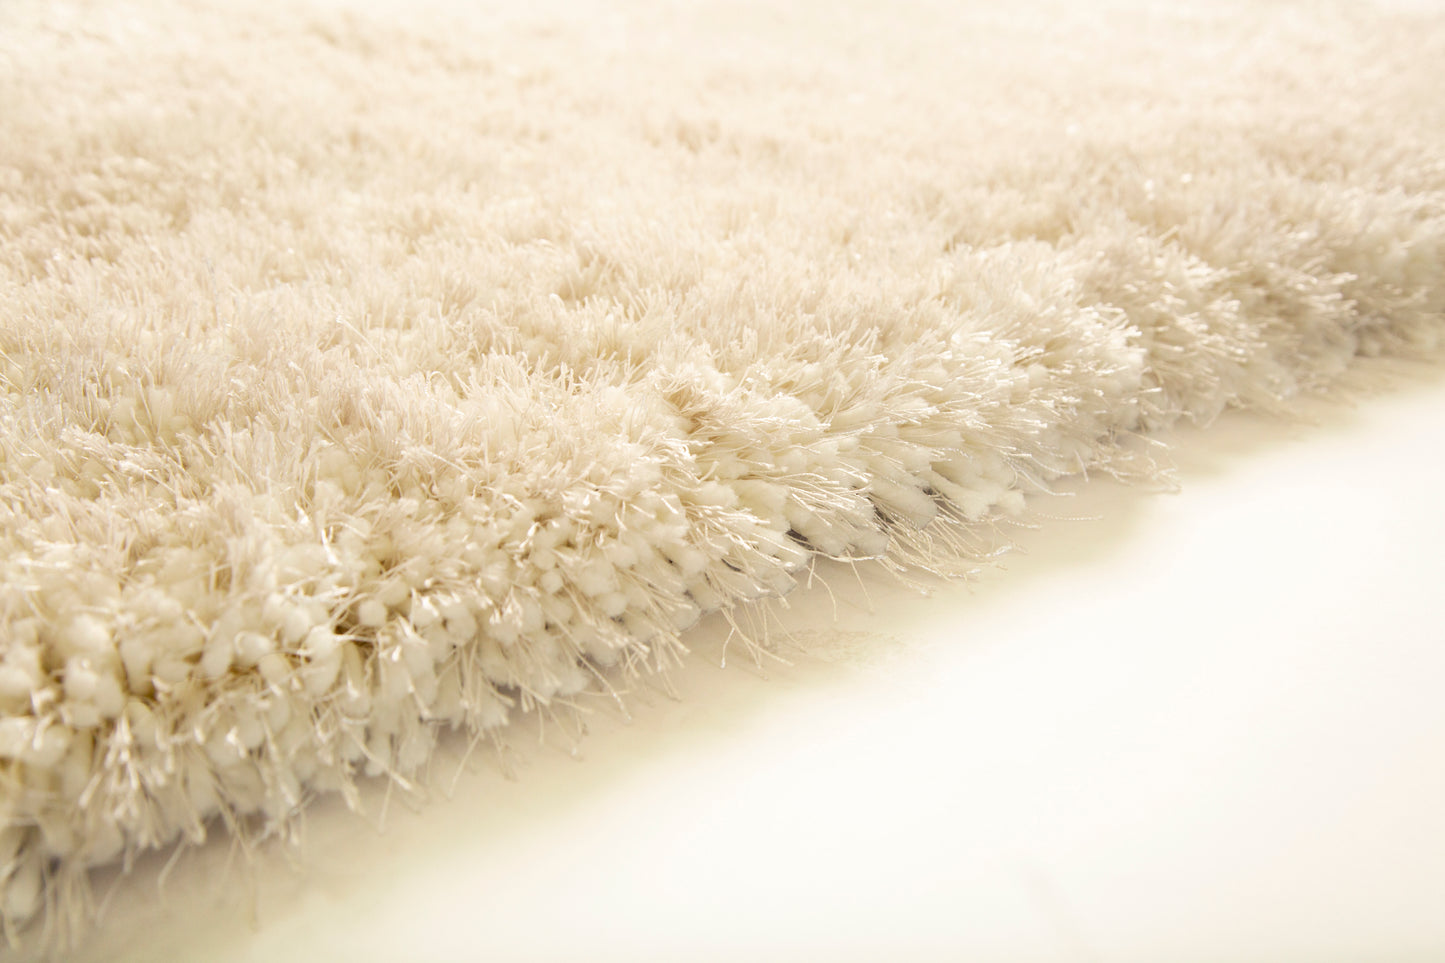 Off White Solid Shag Area Rug/Carpet - Crafted from 100% Polyester, Plush Fluffy Shine, Thick and Thin Yarns Design